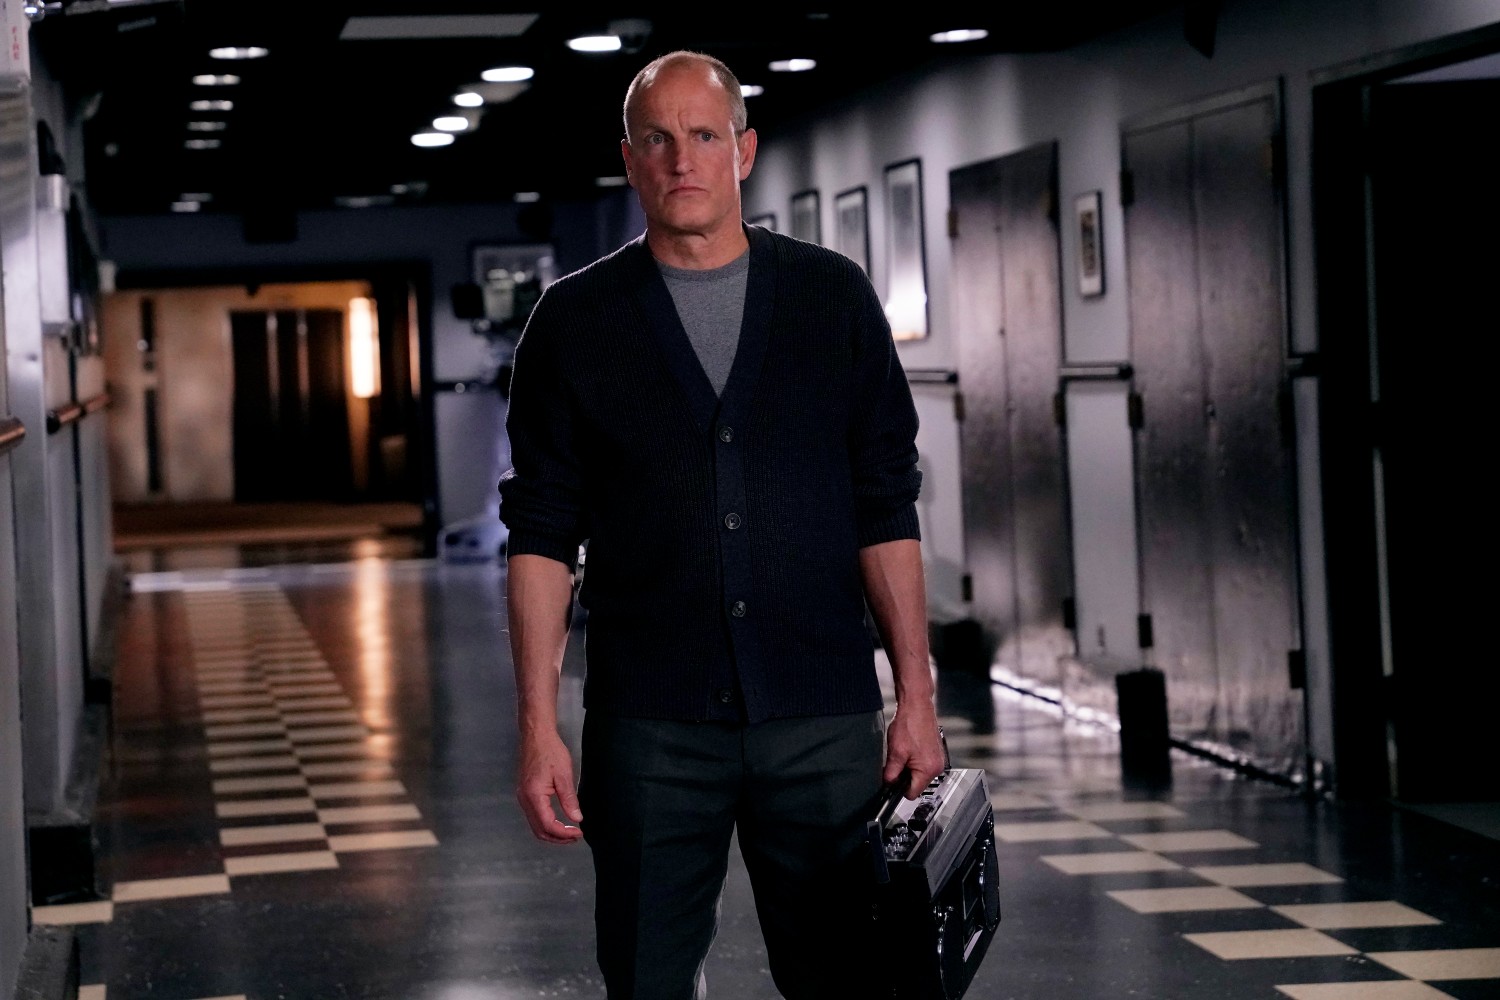 Woody Harrelson Opens "SNL" With a Controversial Monologue InsideHook